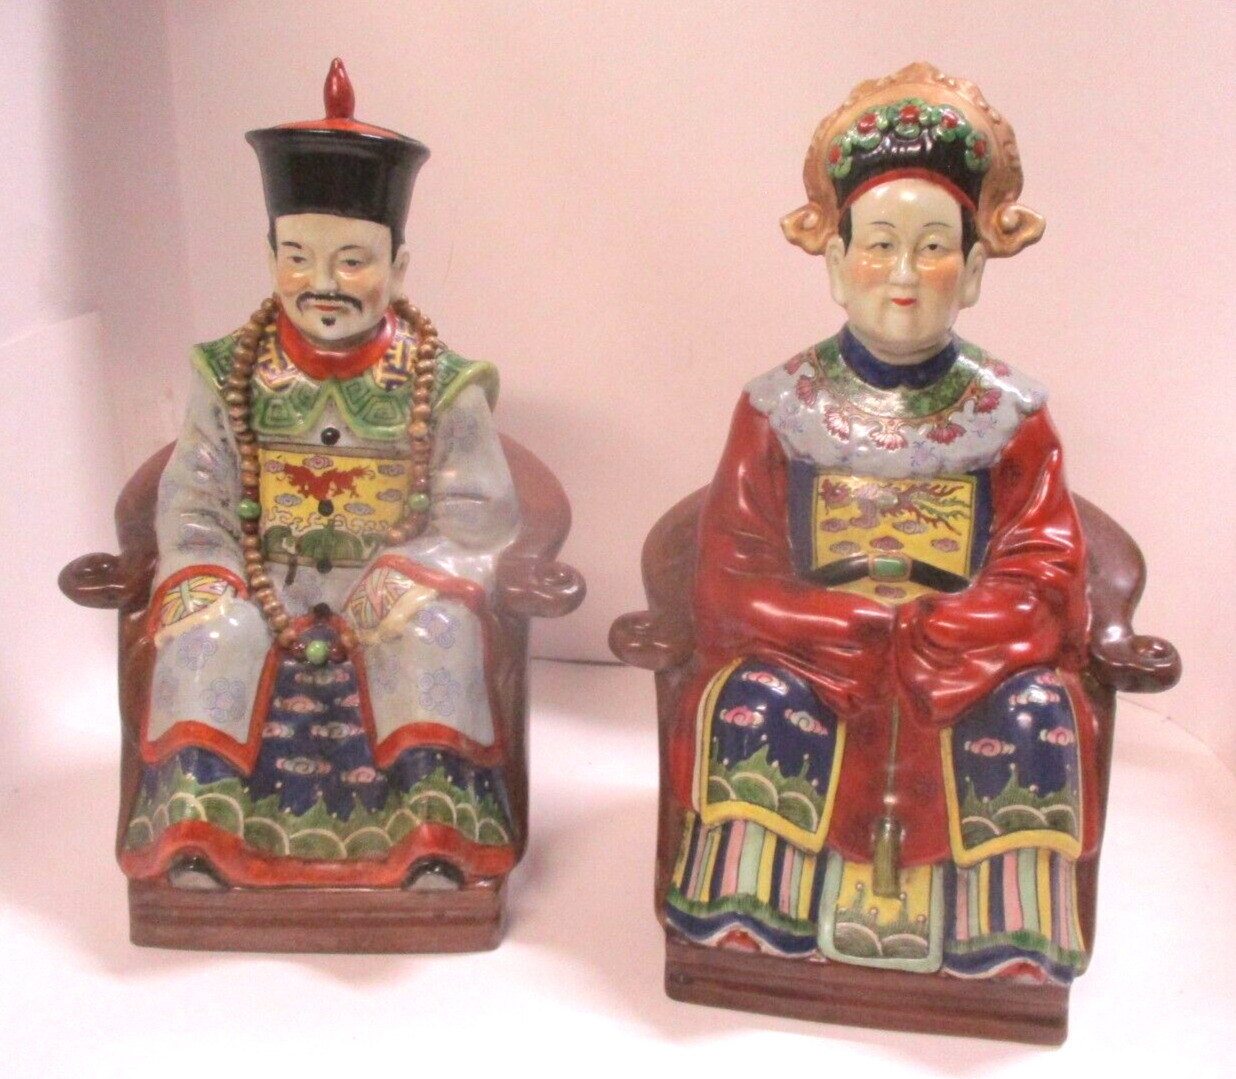 Vintage Hand Painted Porcelain Chinese Emperor And Empress Statues Figurines